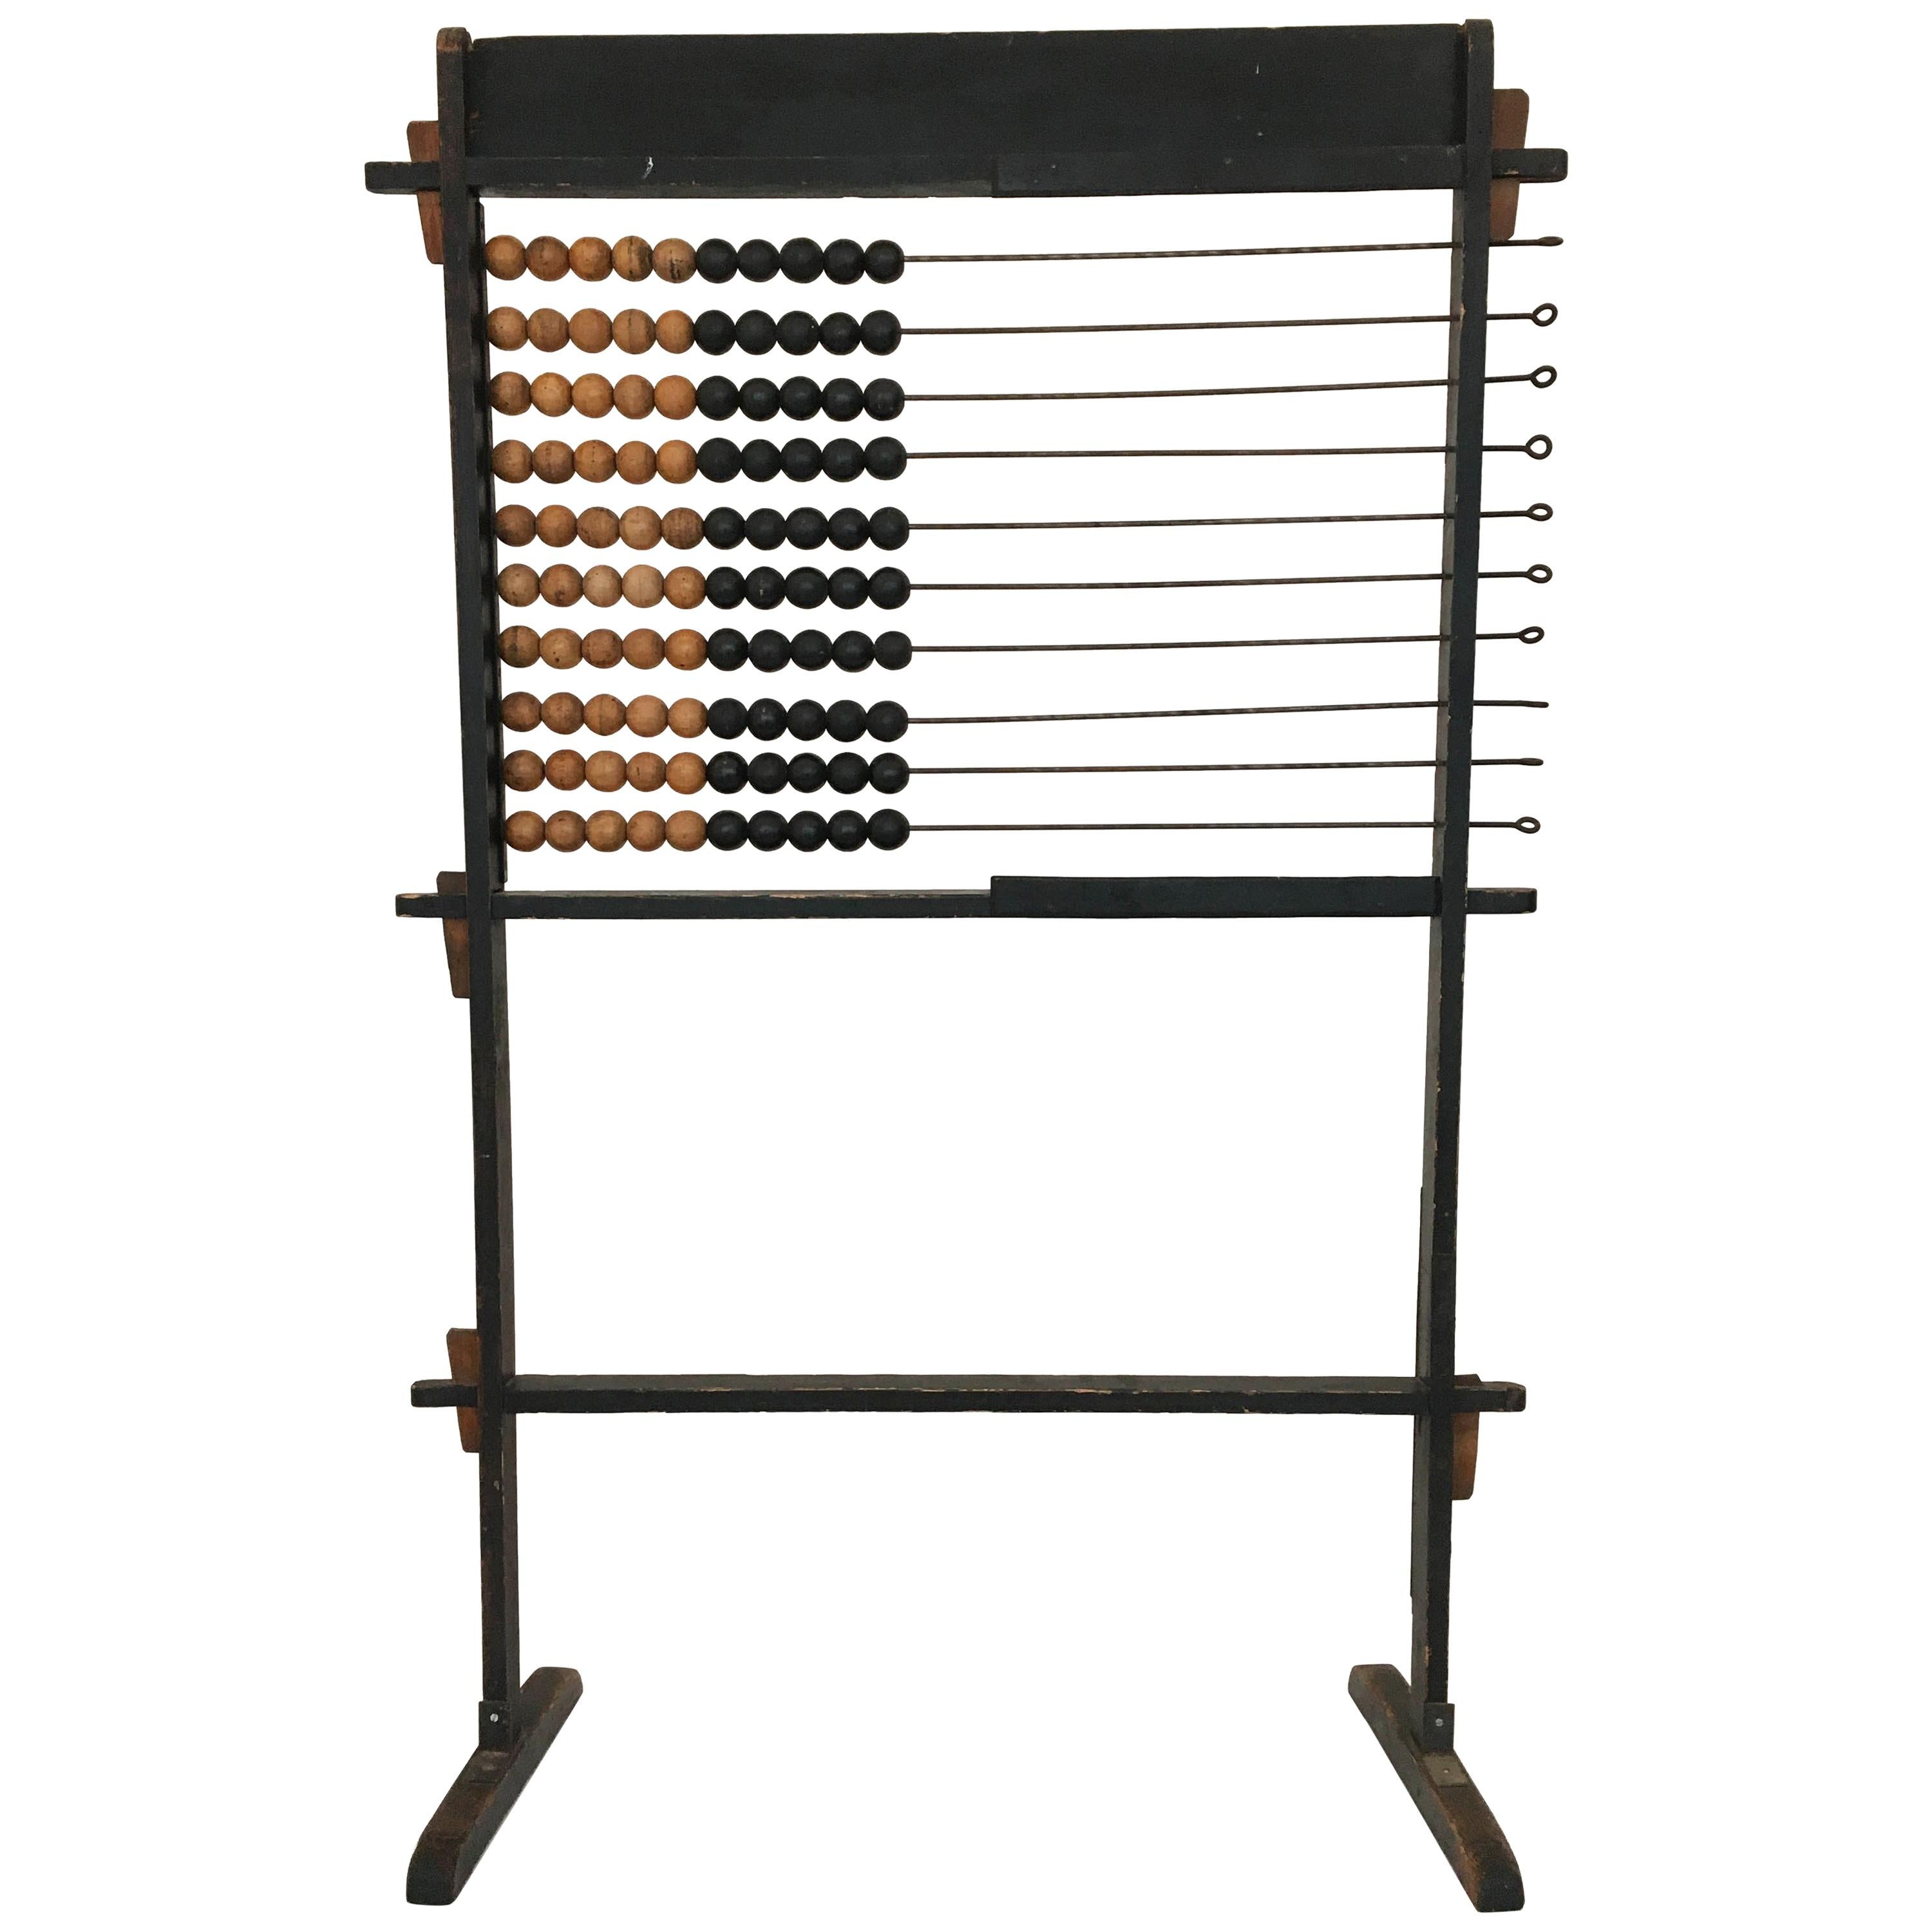 Form Follows Function Modern Abstract Abacus Obsolete Object, France, 1920s im Angebot